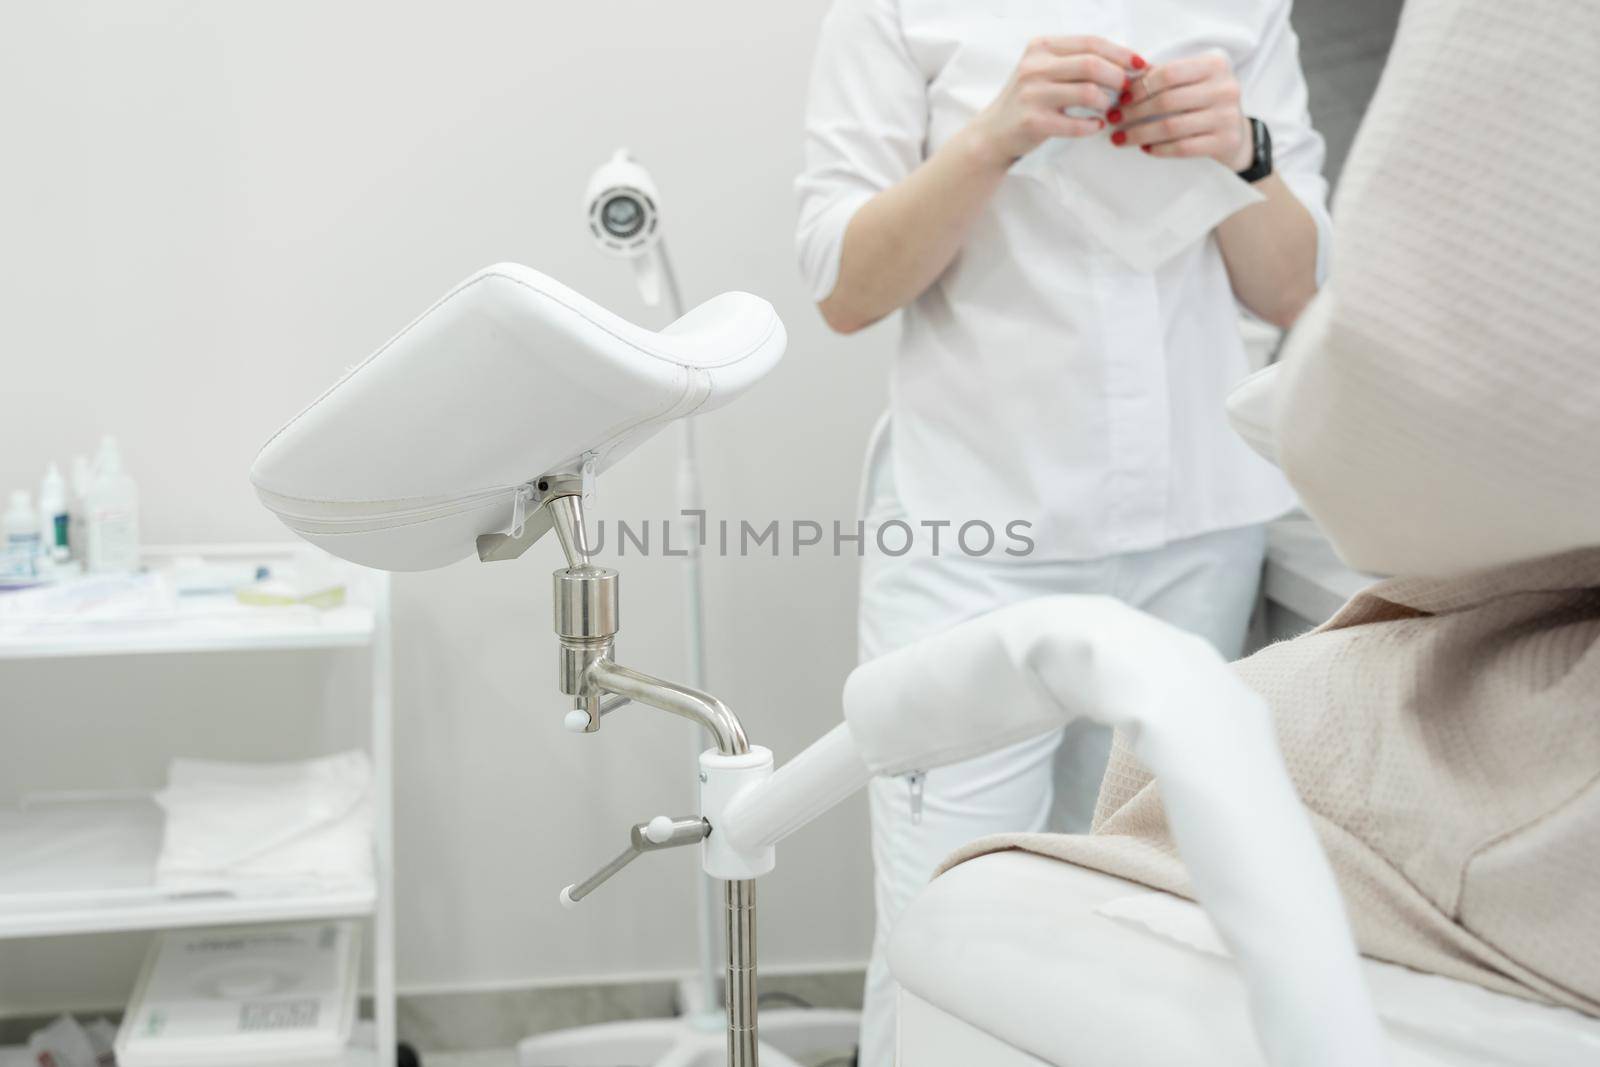 Gynecologist during the consultation in the gynecological office by Mariakray